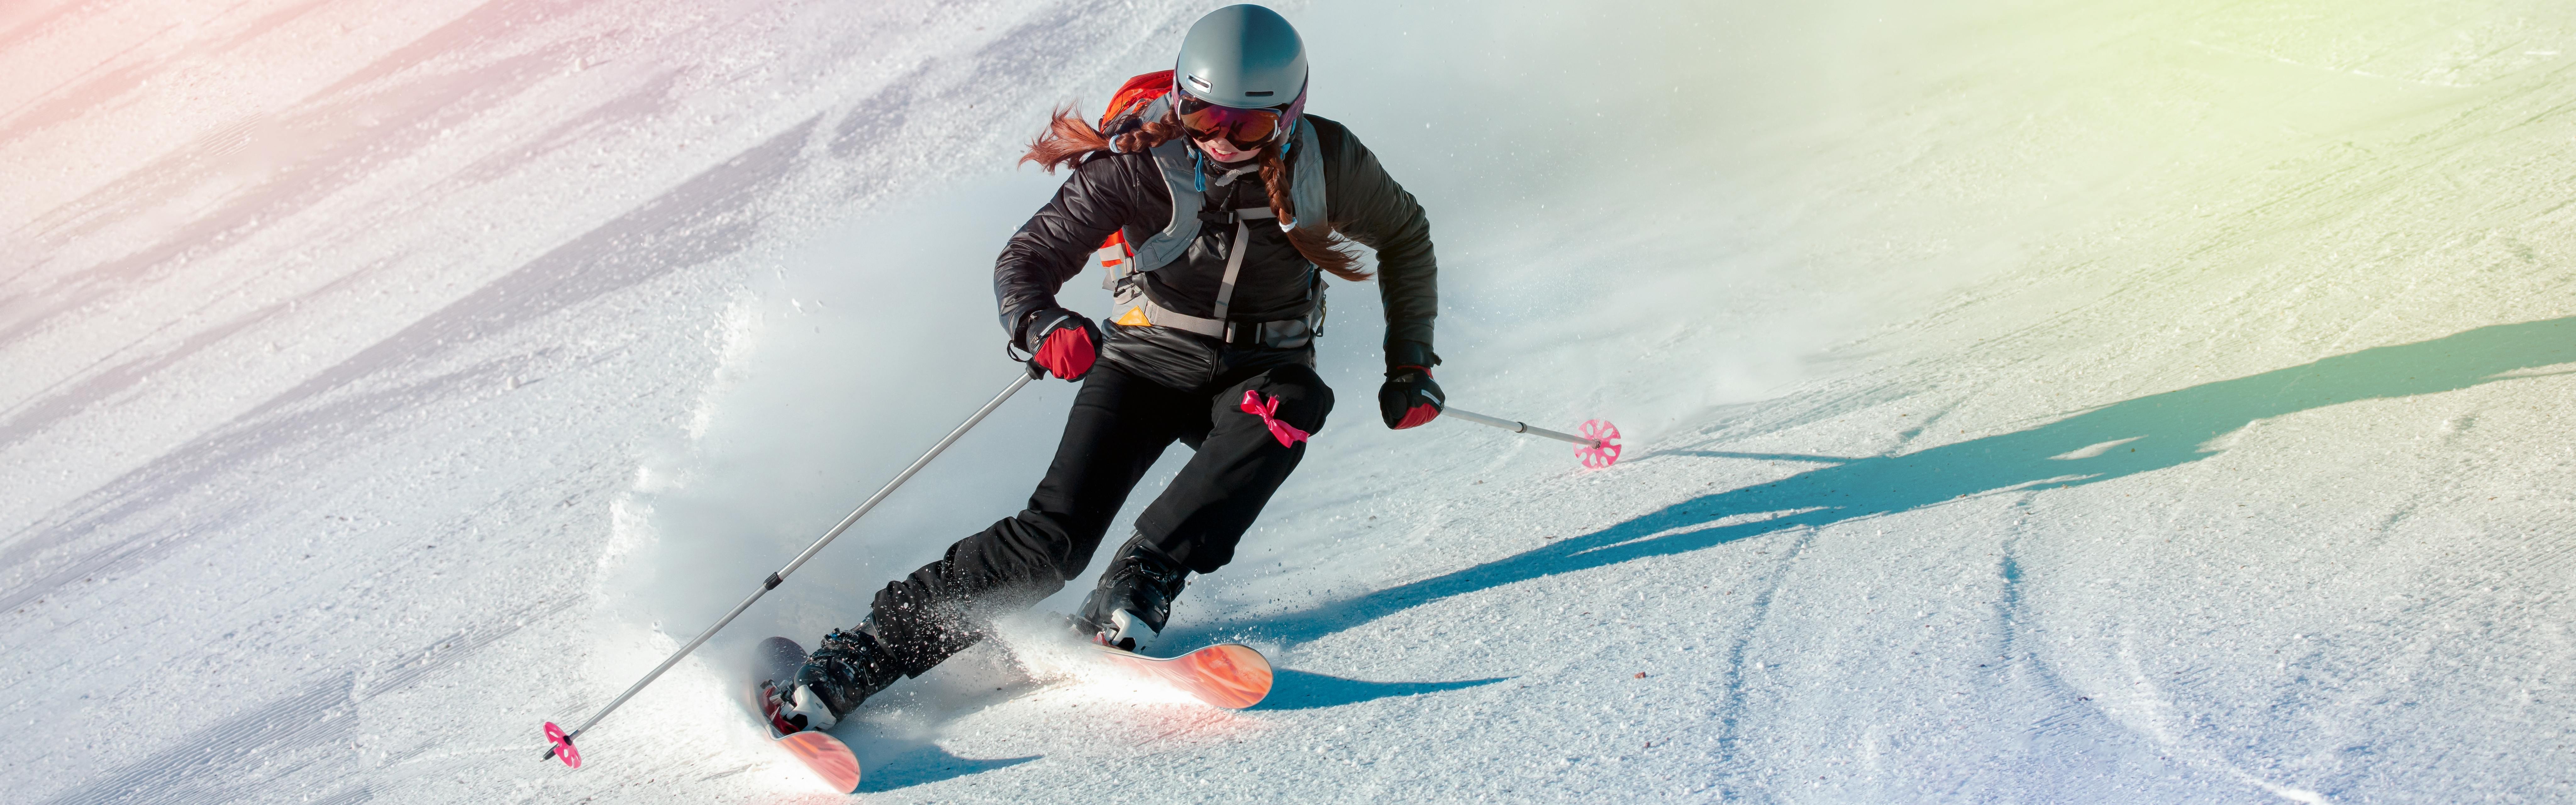 An Expert Guide to North Face Women's Ski Jackets